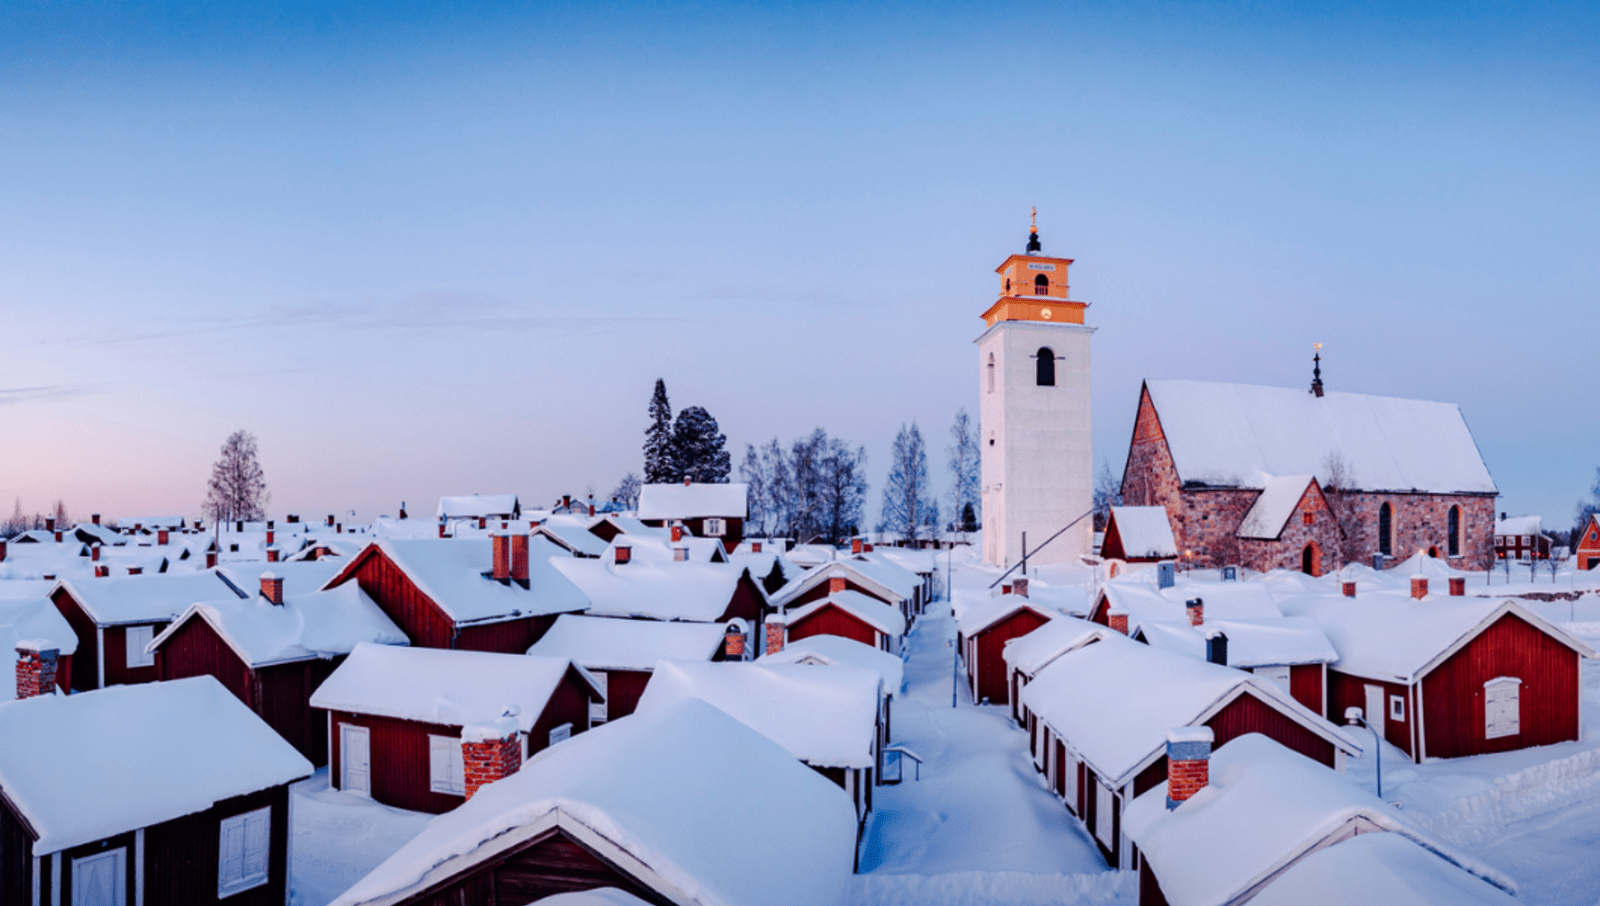 Small red houses covered in blanket of thick snow with tall church tower in middle